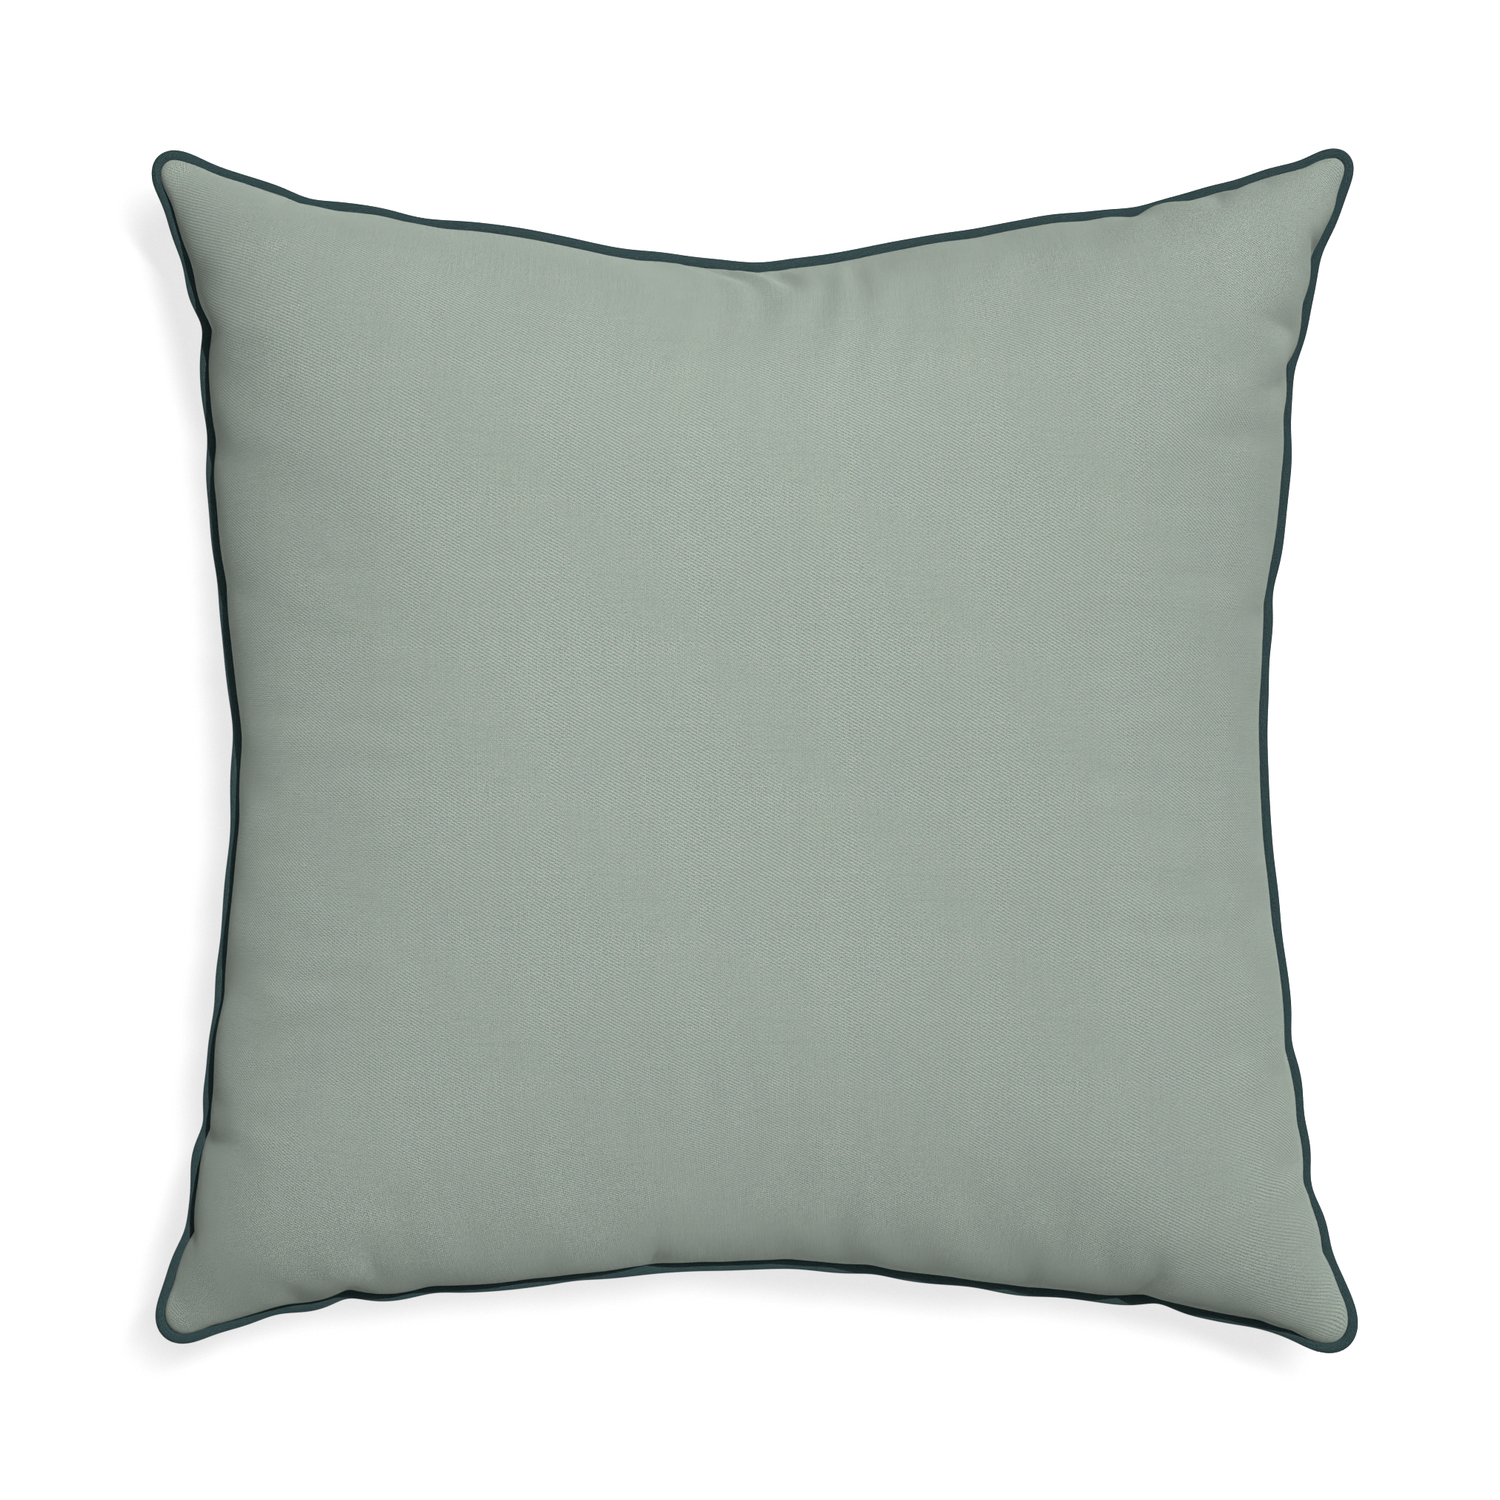 Euro-sham sage custom sage green cottonpillow with p piping on white background